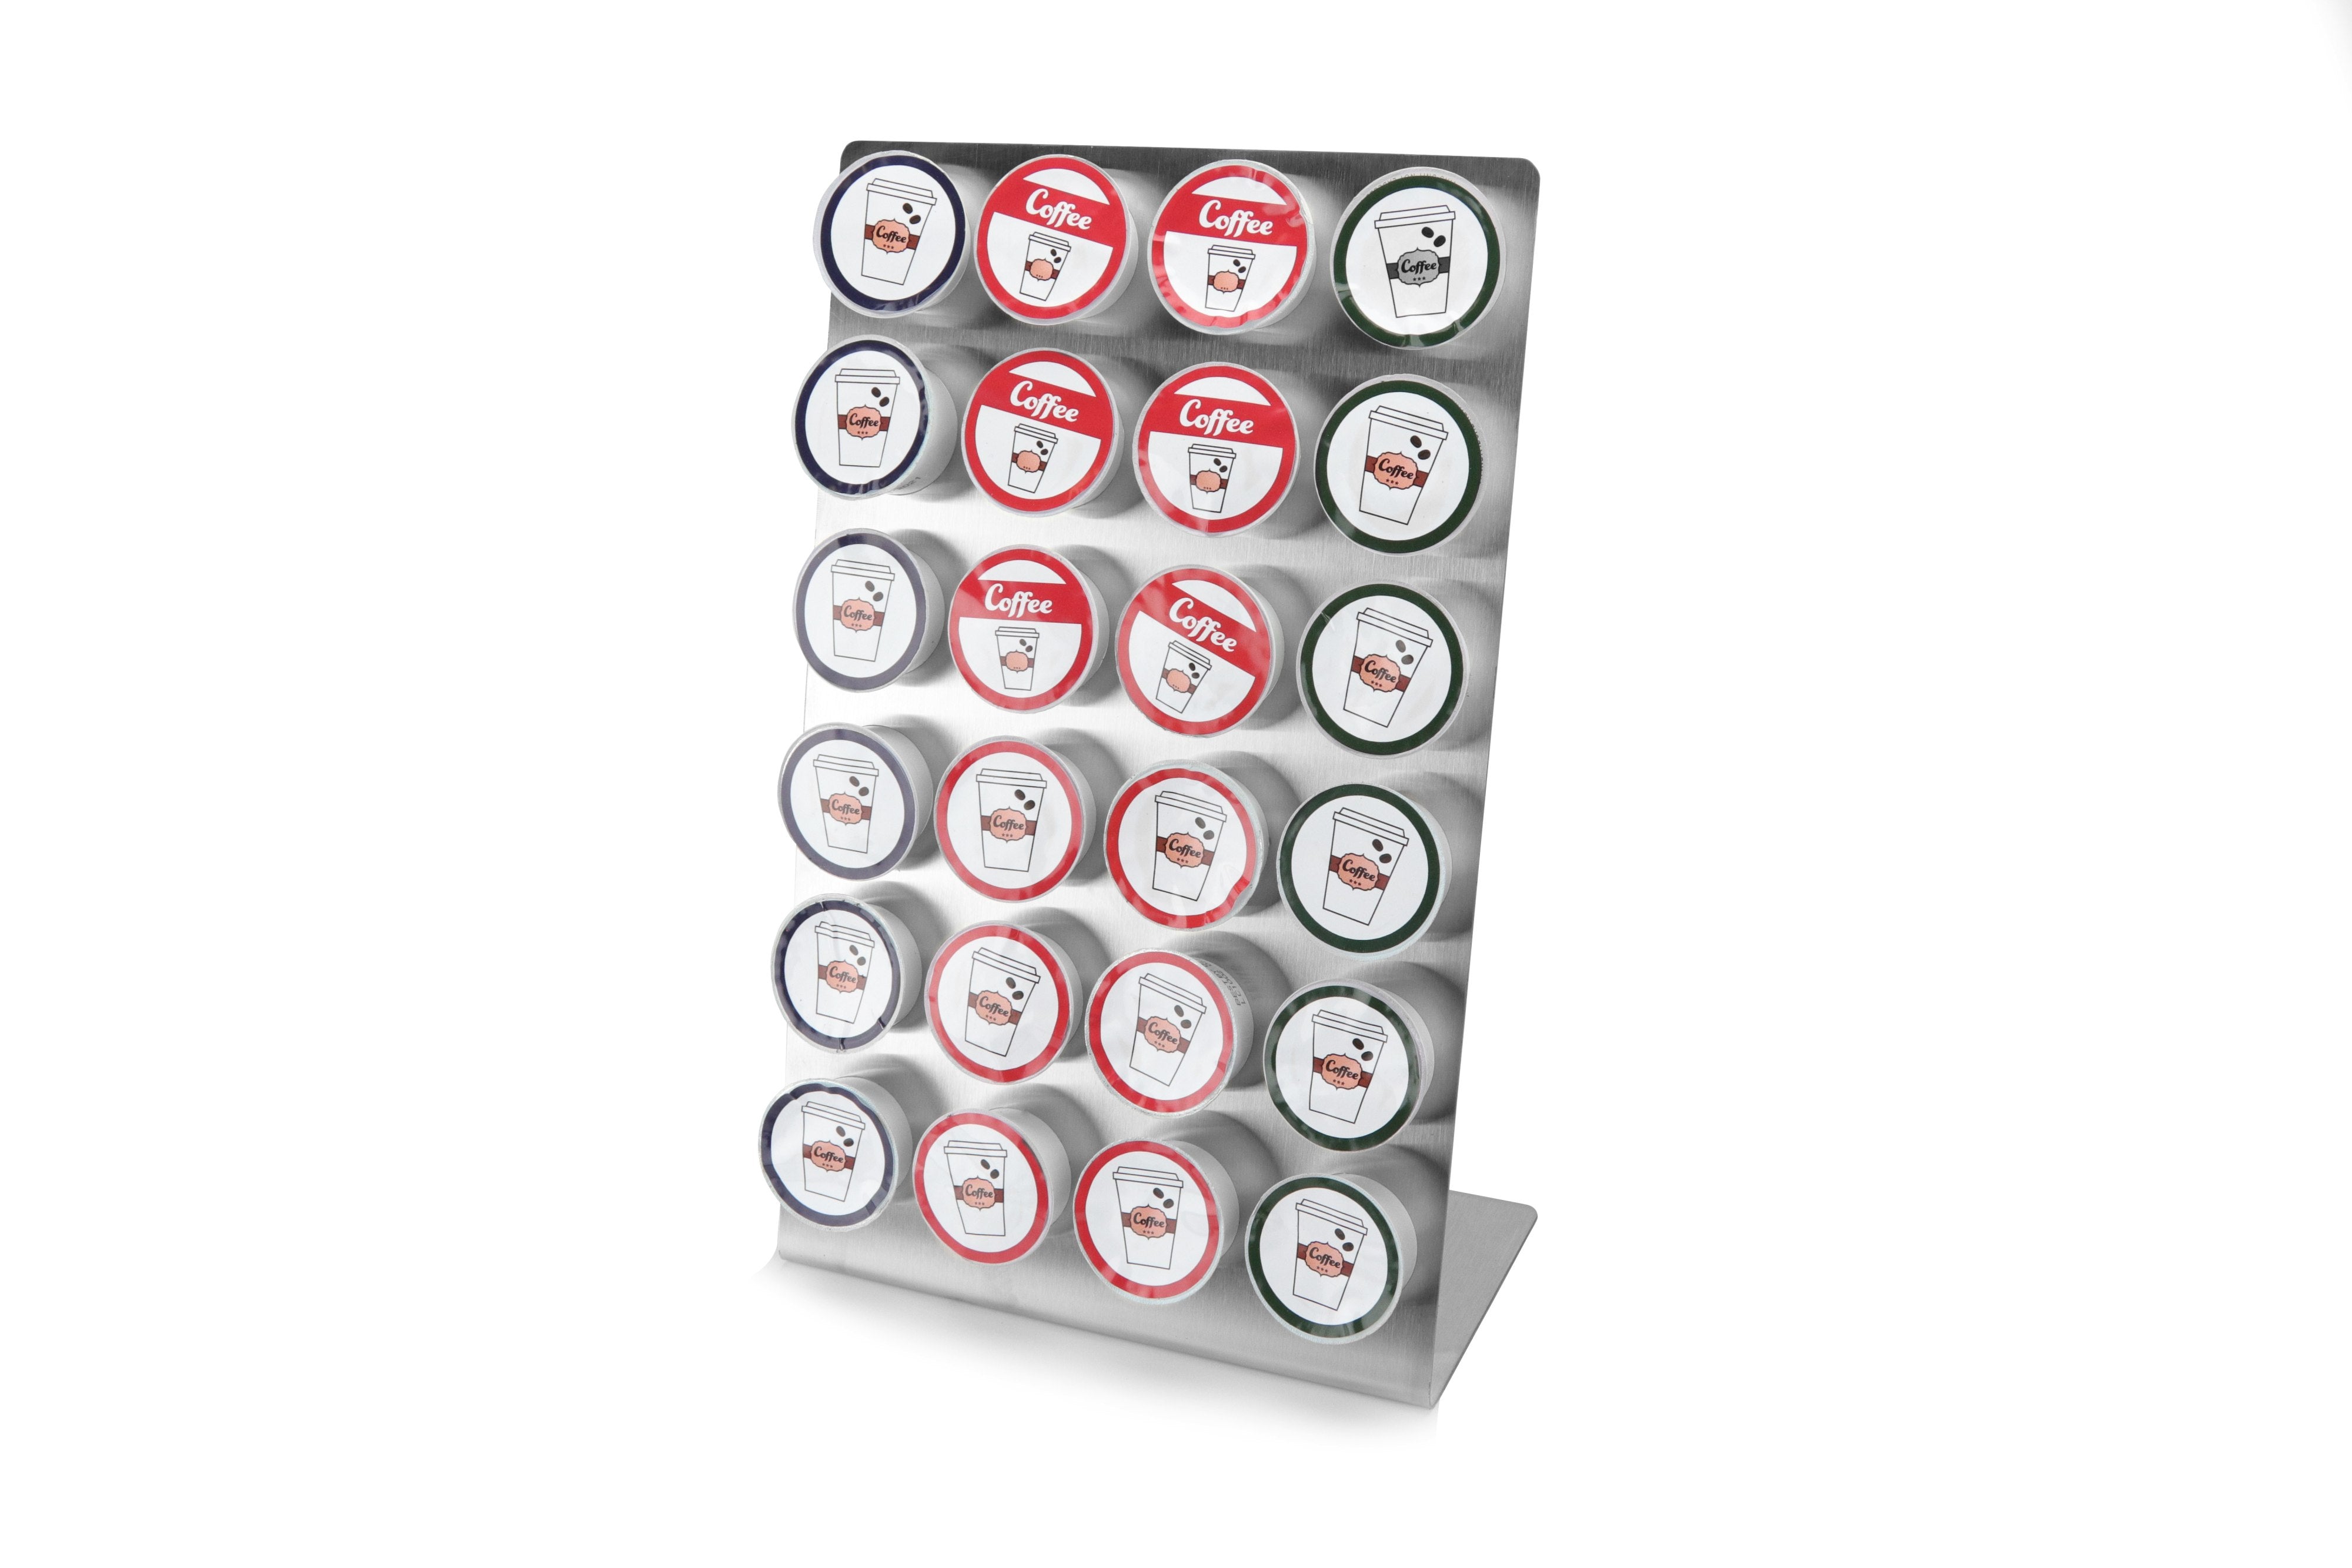 Coffee Pod Brushed Stainless Steel Organizer Stand Fits Keurig K-Cup Holds 24